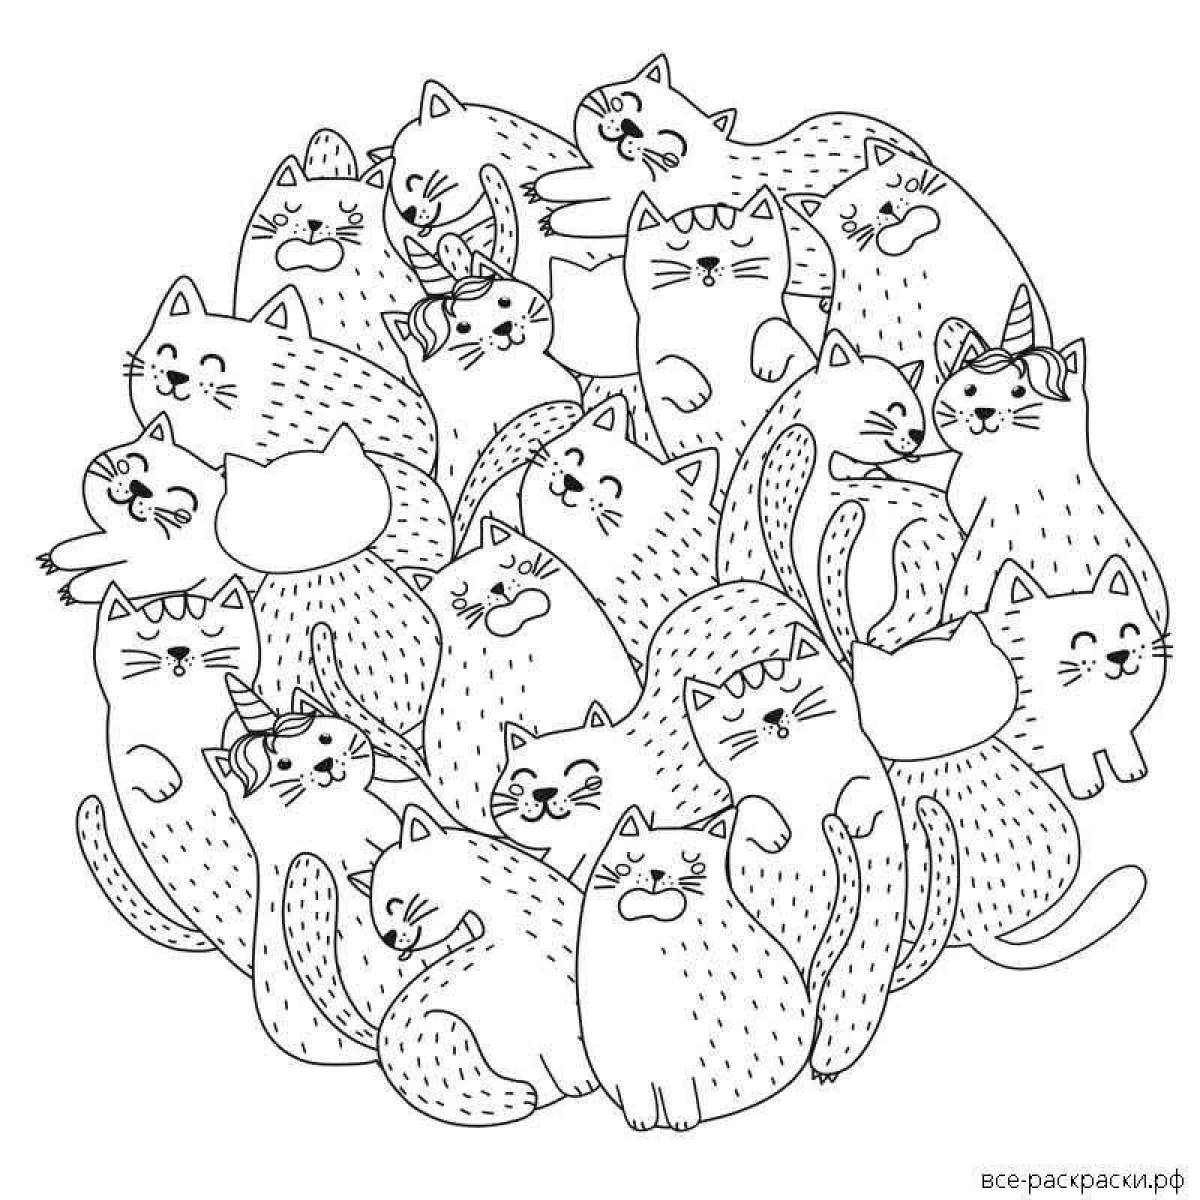 Live coloring with many cats